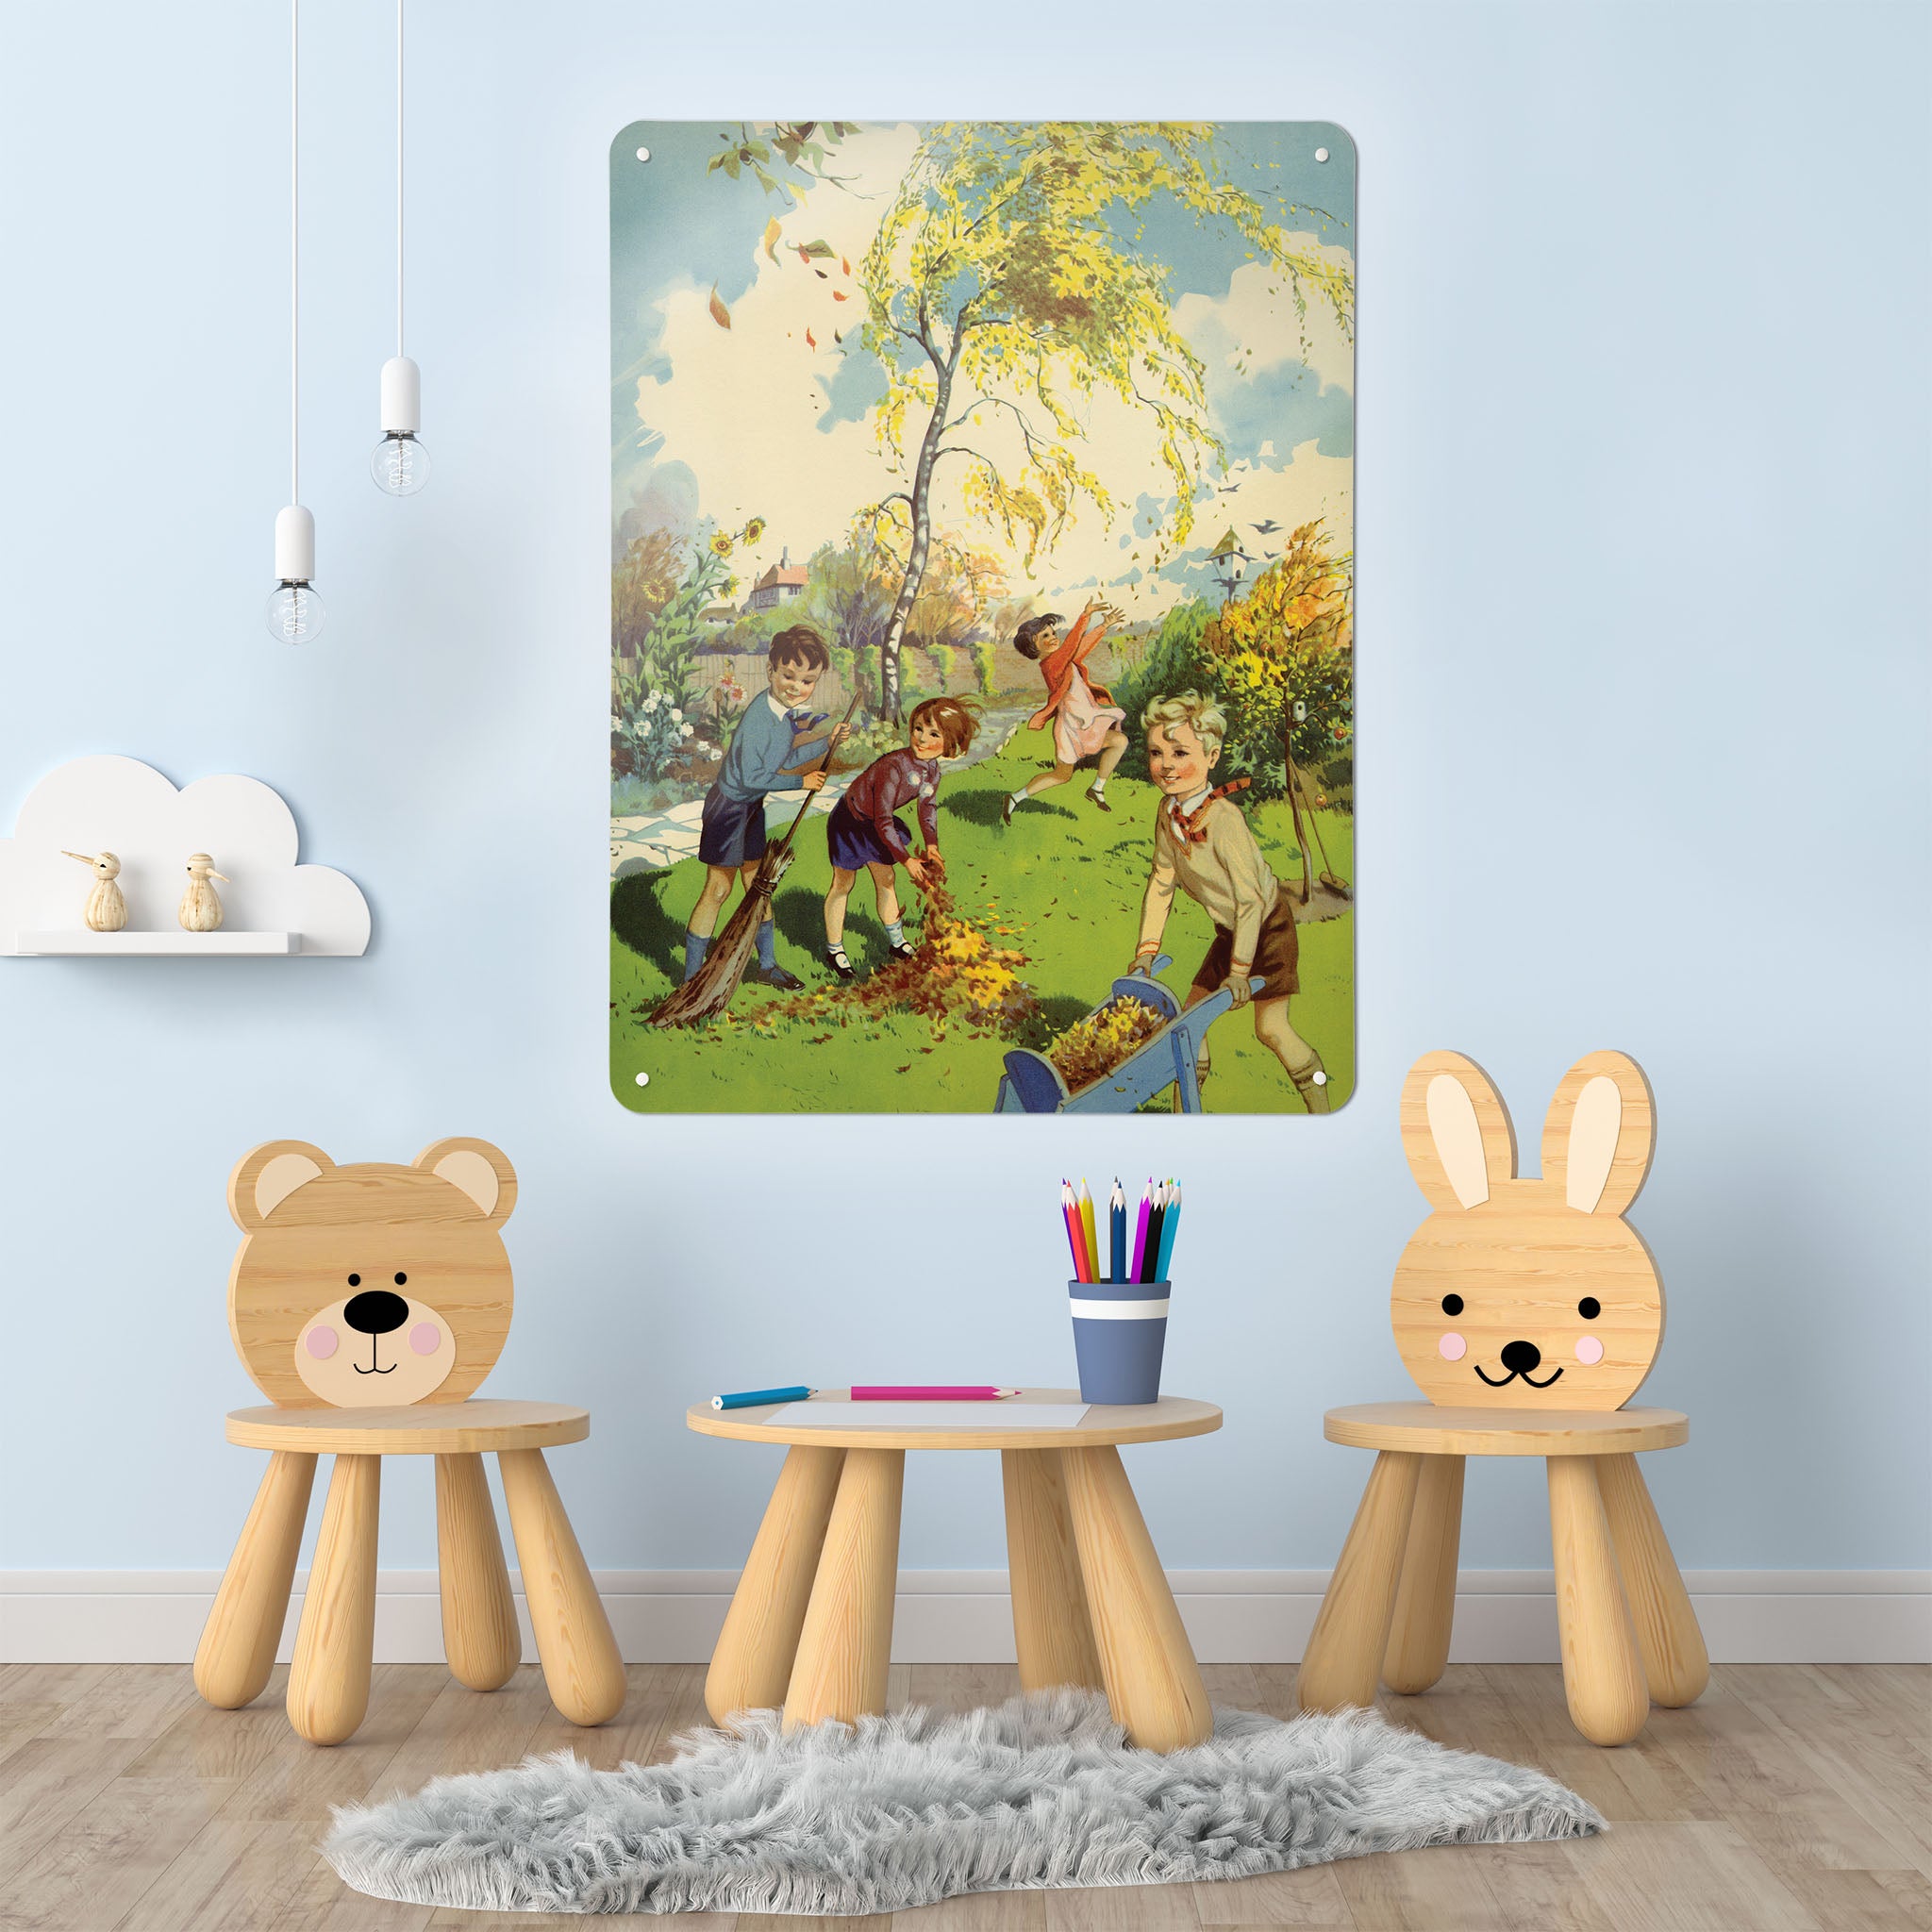 A playroom interior with a magnetic metal wall art panel showing an  illustration of children collecting leaves